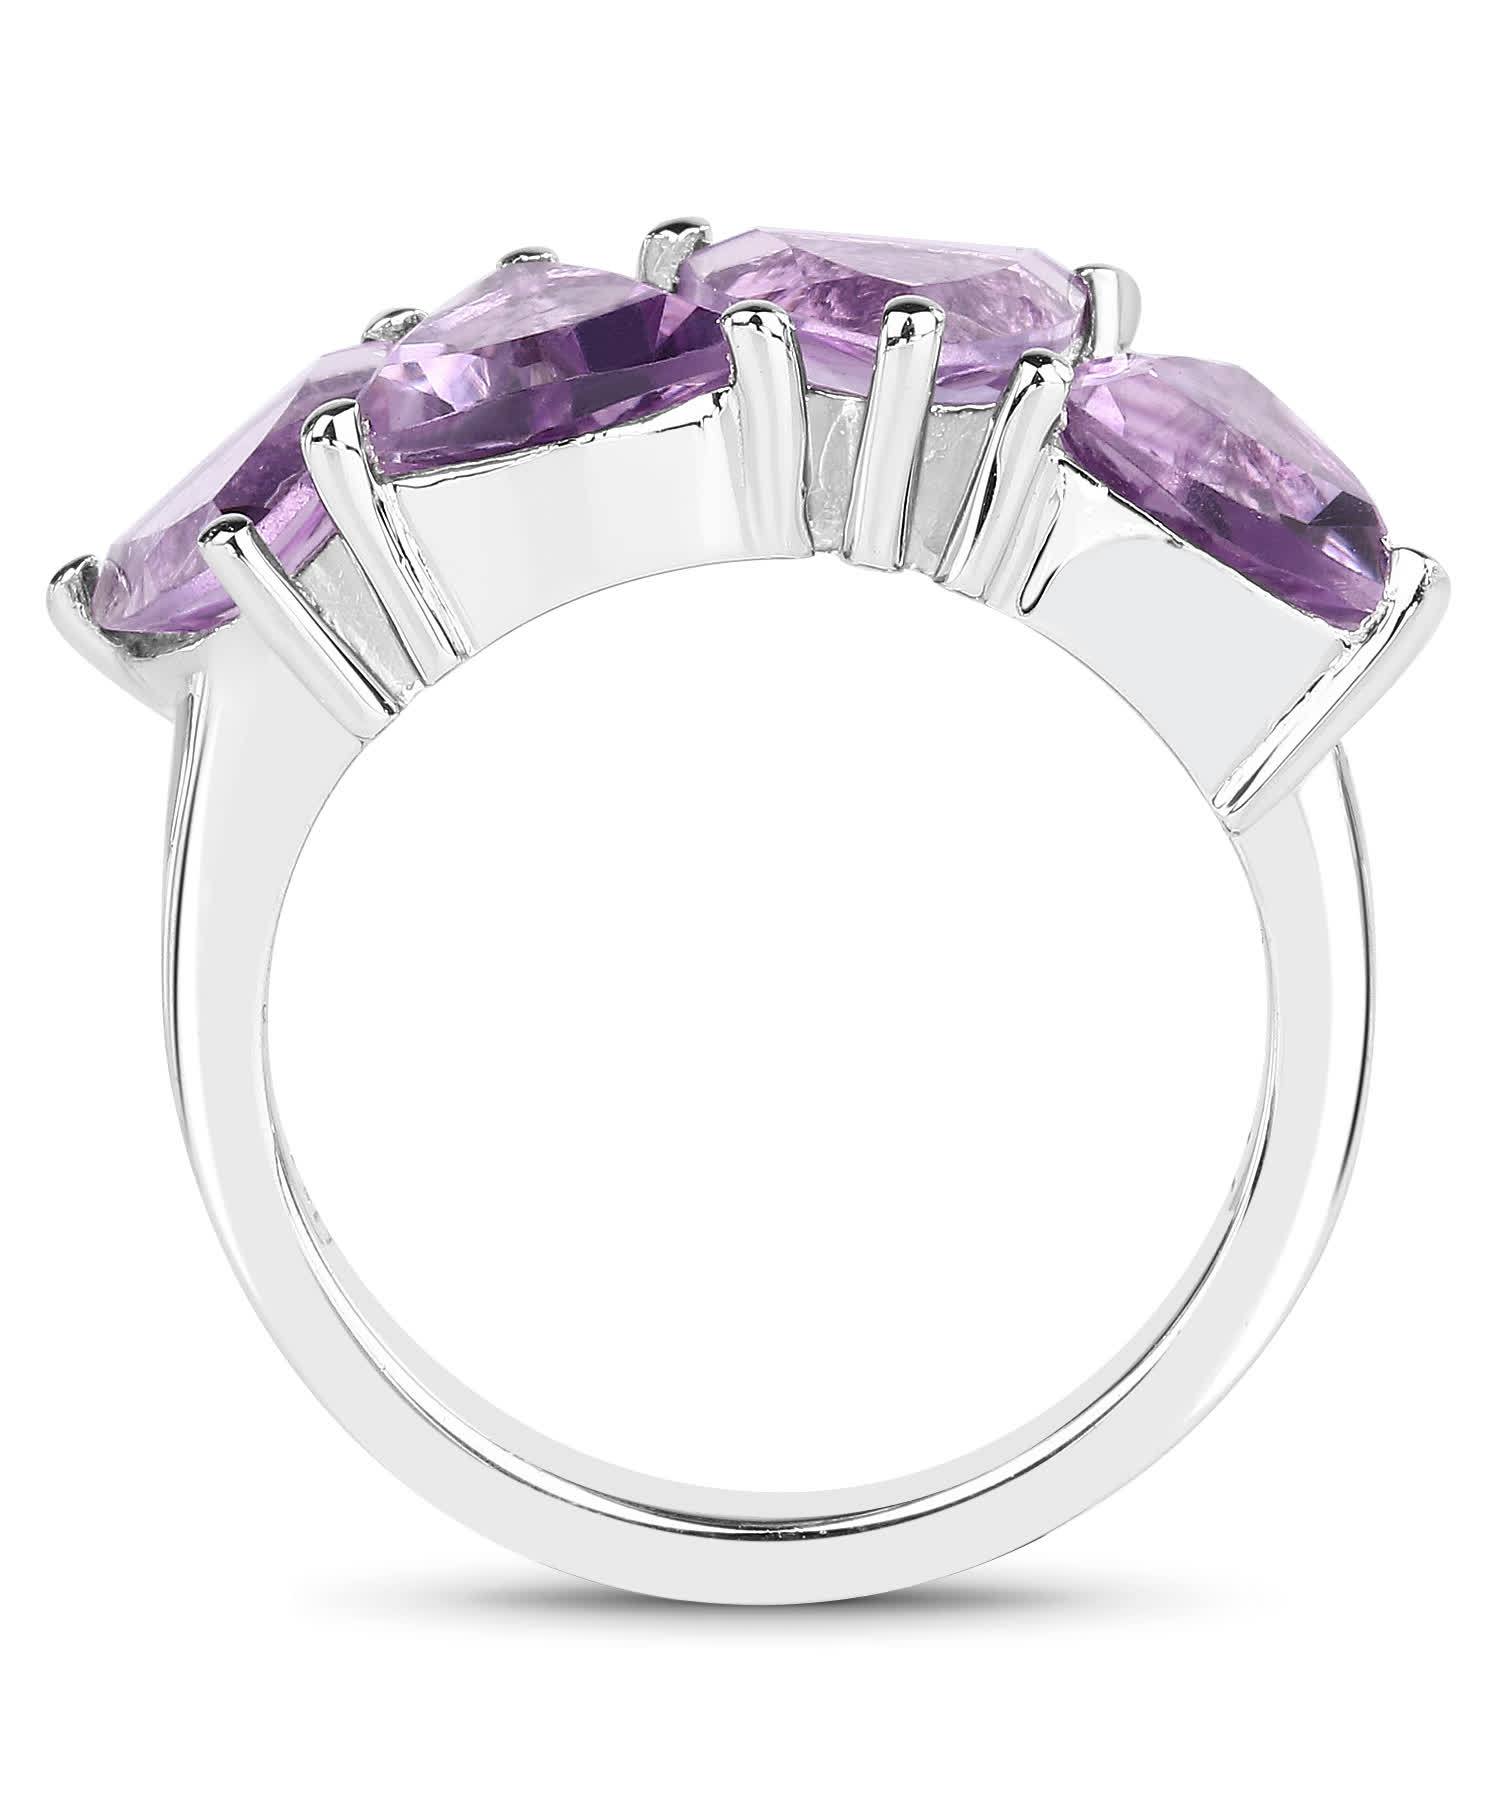 3.60ctw Natural Amethyst Rhodium Plated 925 Sterling Silver Fashion Right Hand Ring View 2